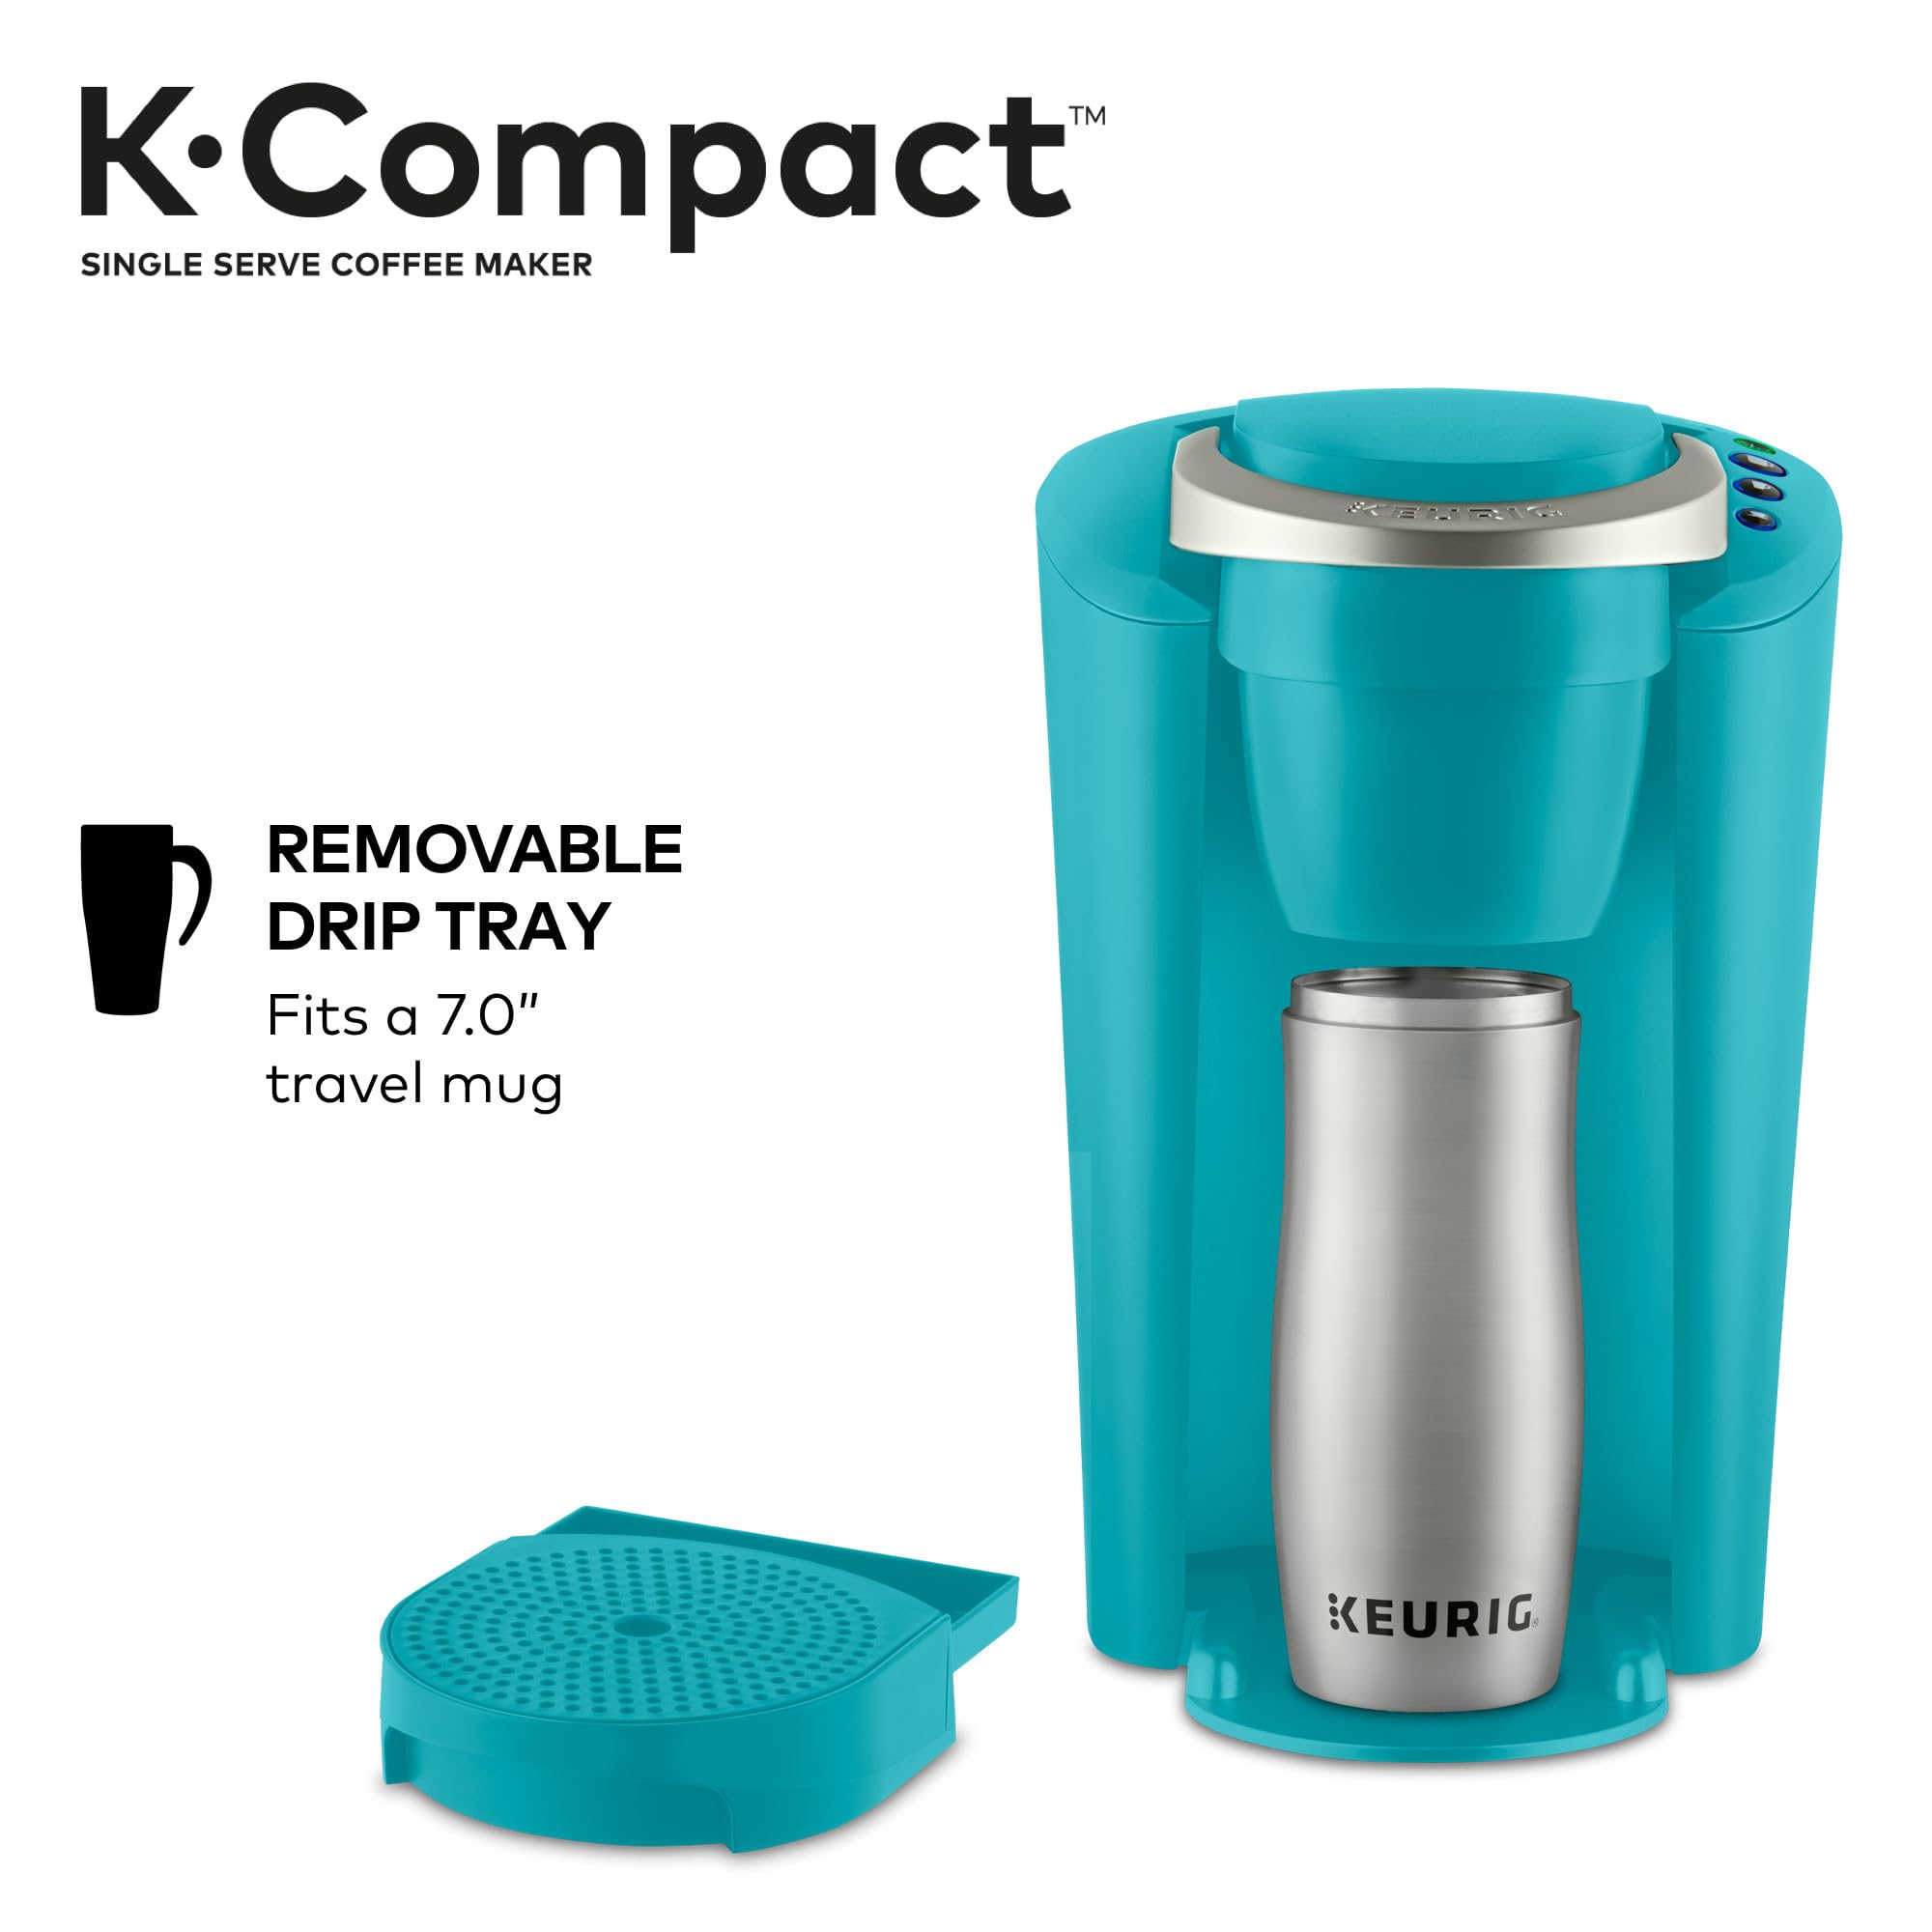 Keurig K-Compact Coffee Maker, Single Serve K-Cup Pod Coffee Brewer, Turquoise